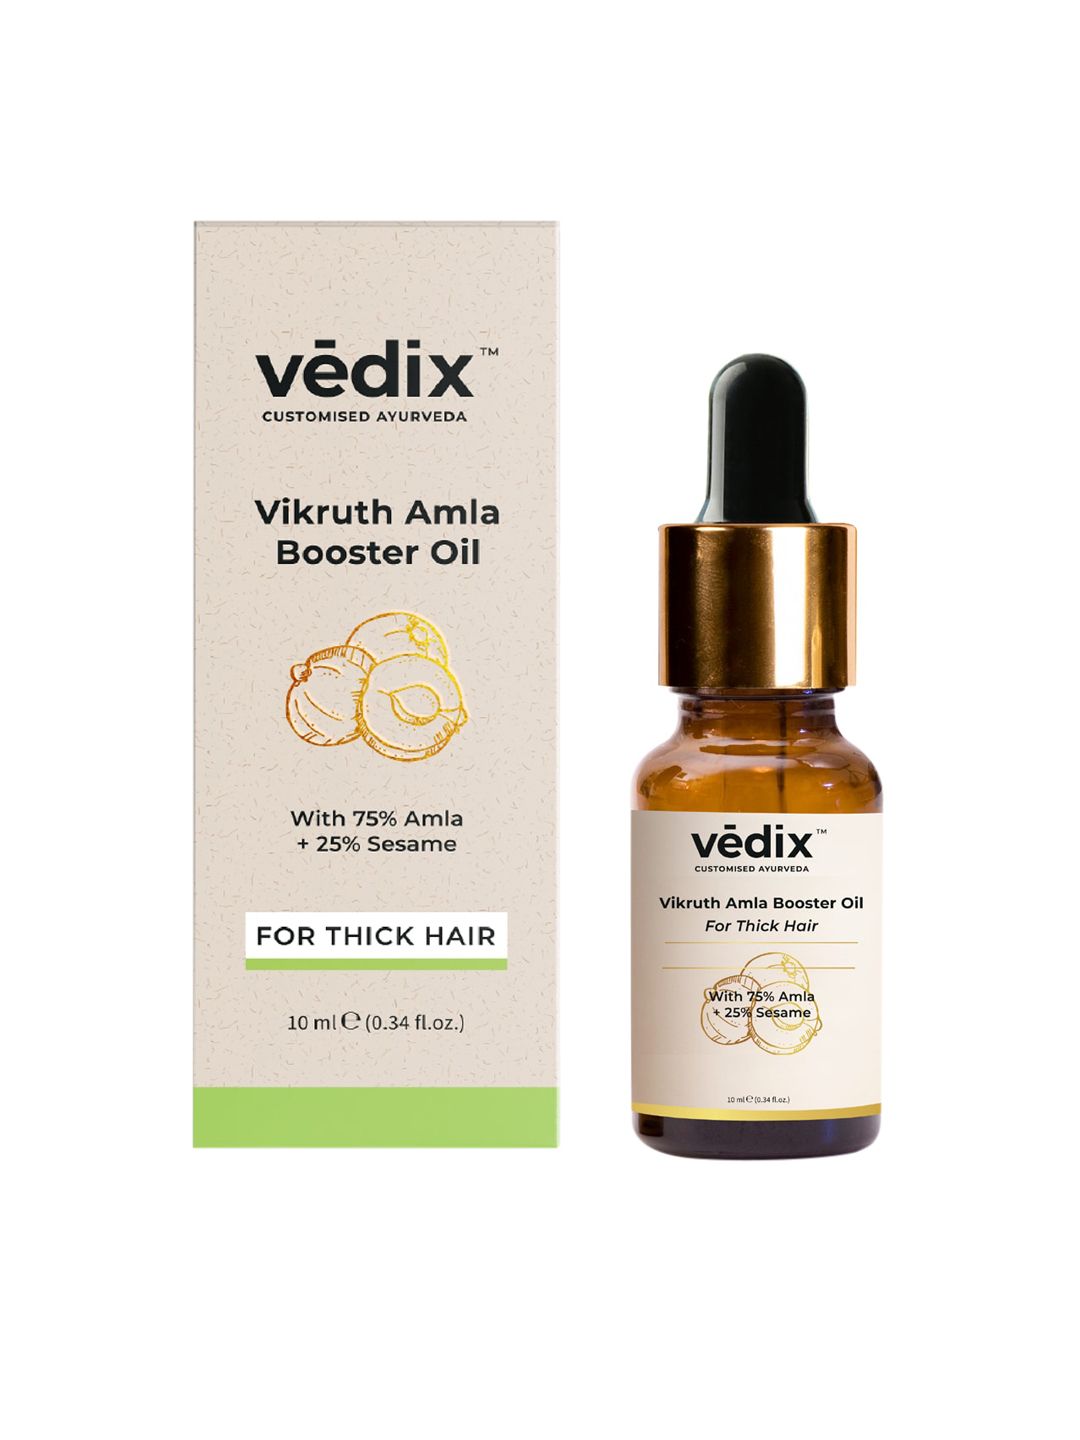 VEDIX Ayurvedic Hair Oil Vikruth Amla Booster Oil For Hair Growth And Thick Hair - 10 ml Price in India